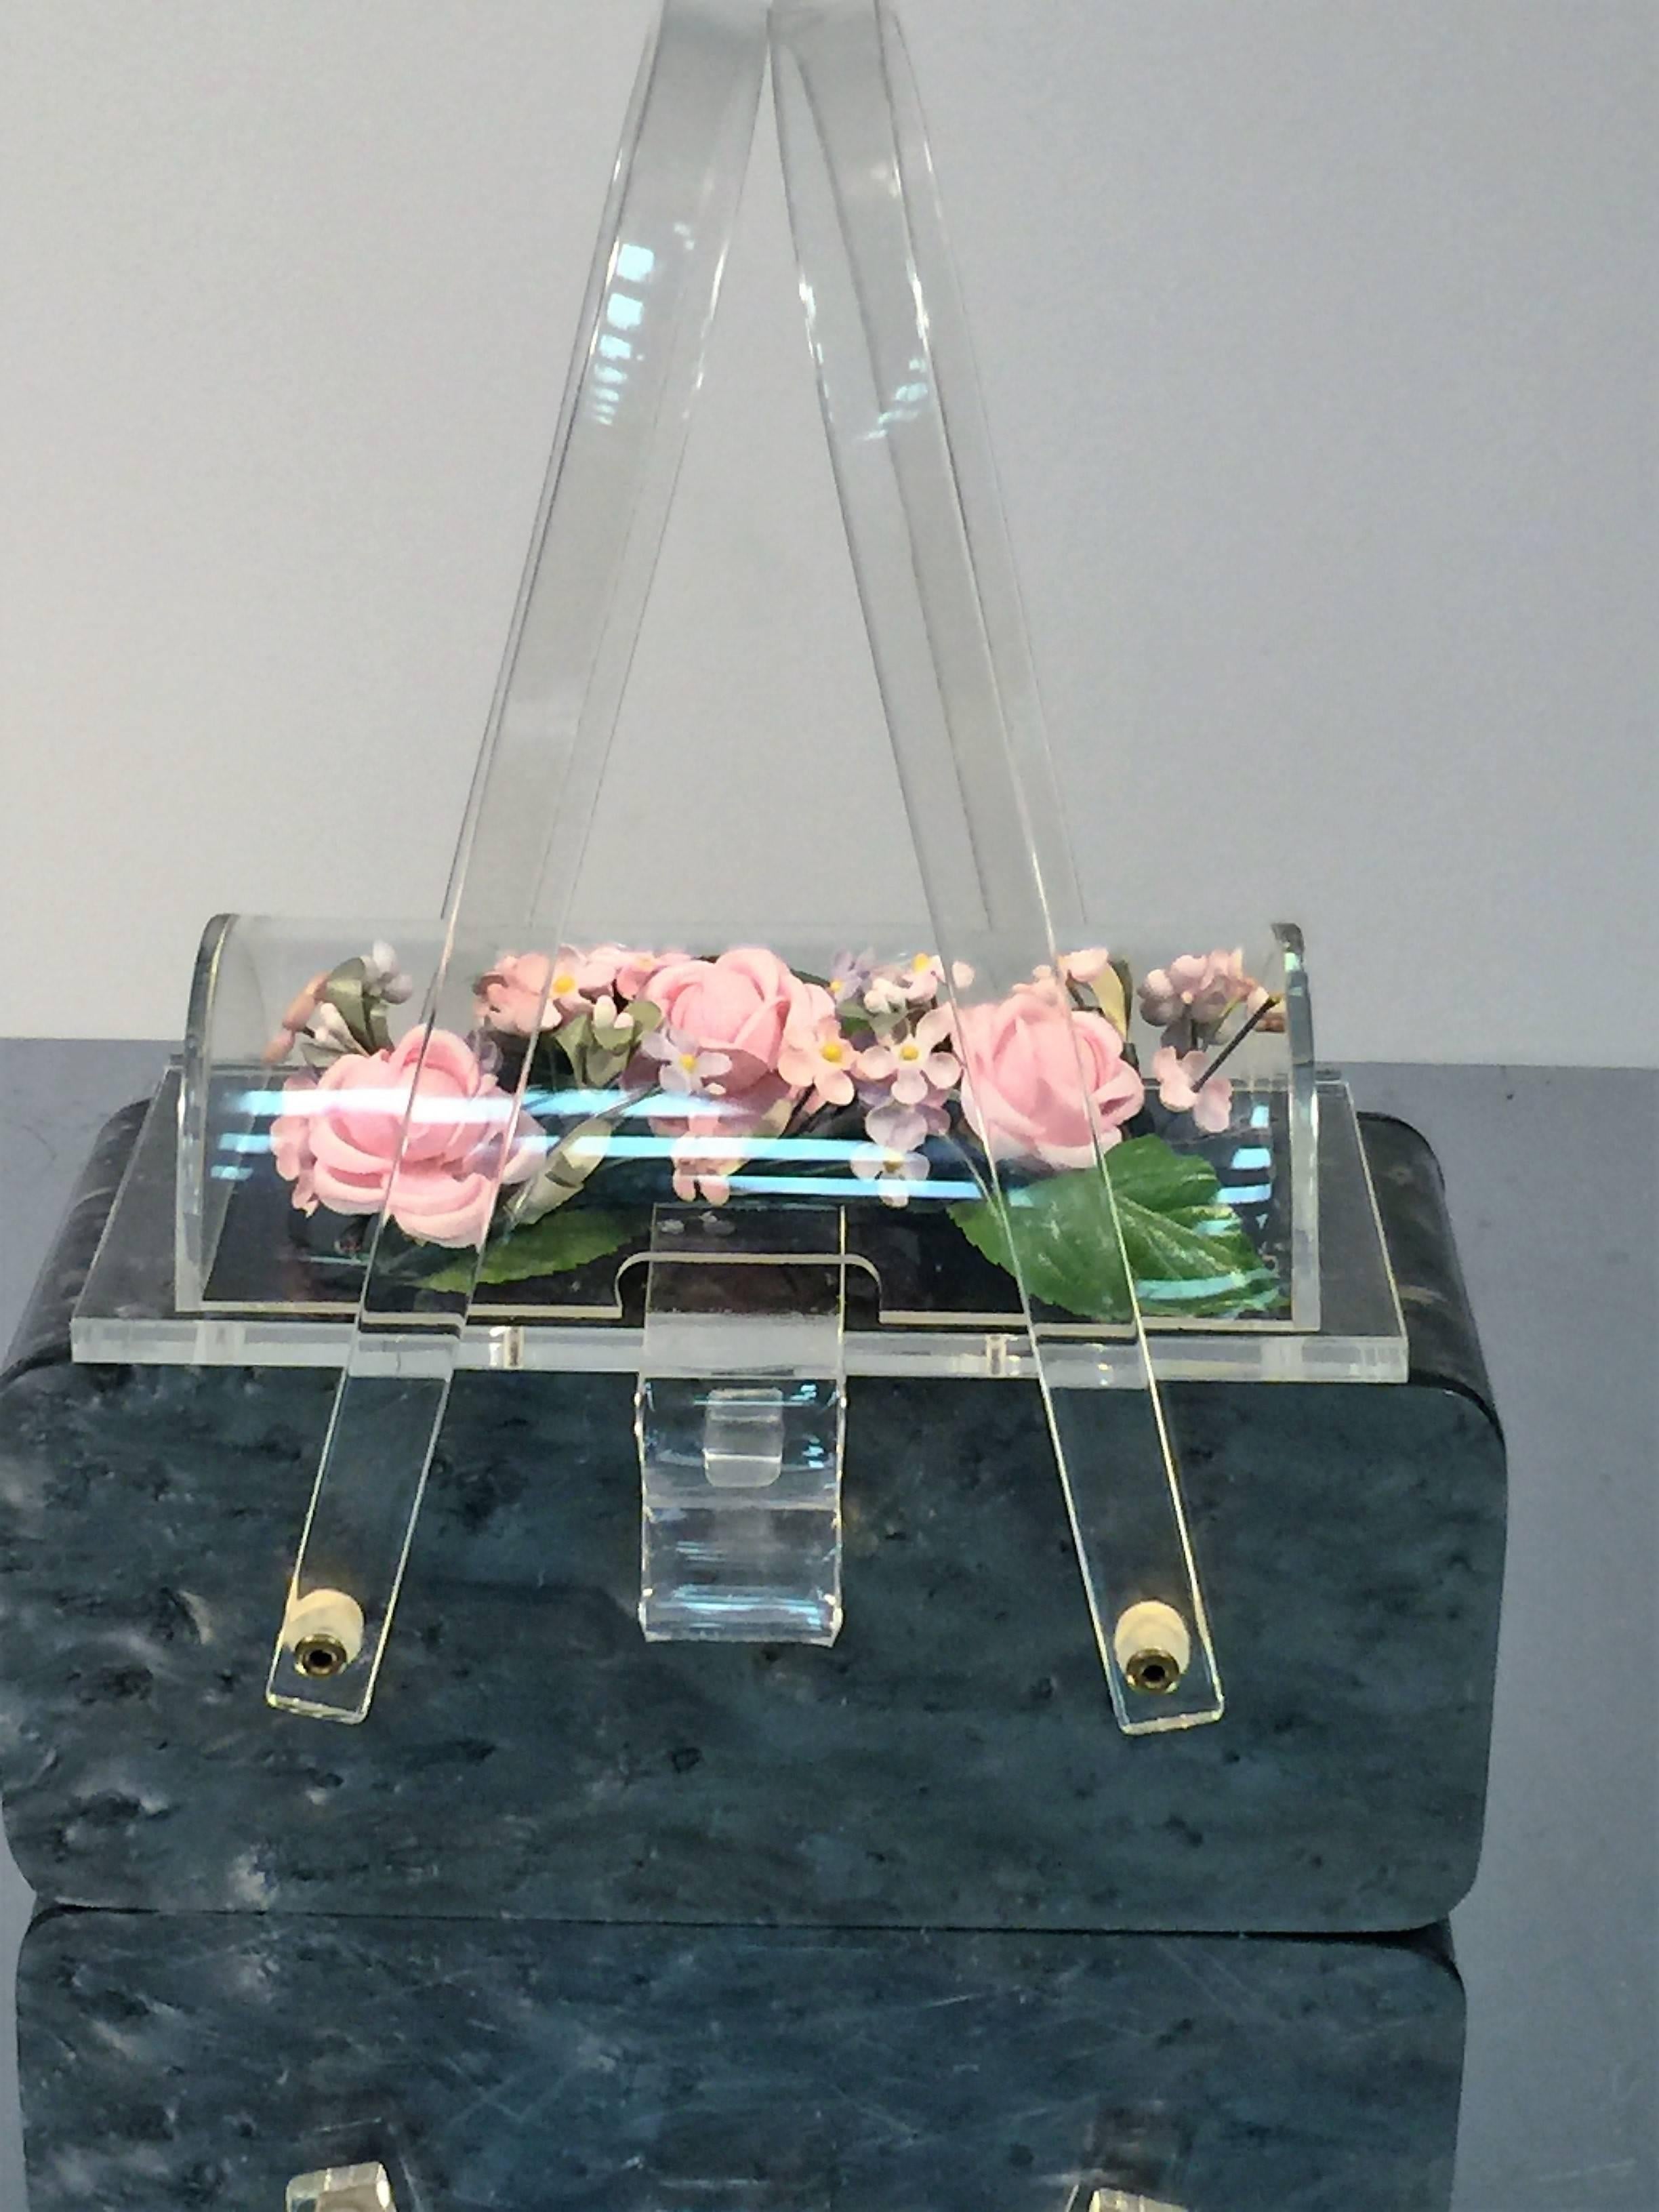 Beautiful Gray Bodied Lucite Handbag with Clear Curved Lucite Dome that encases Pink Silk Flowers with Green Leaves.Designed in the 1950's this is a real showstopper that is perfect for the summer to wear with a great summer dress.In excellent neo